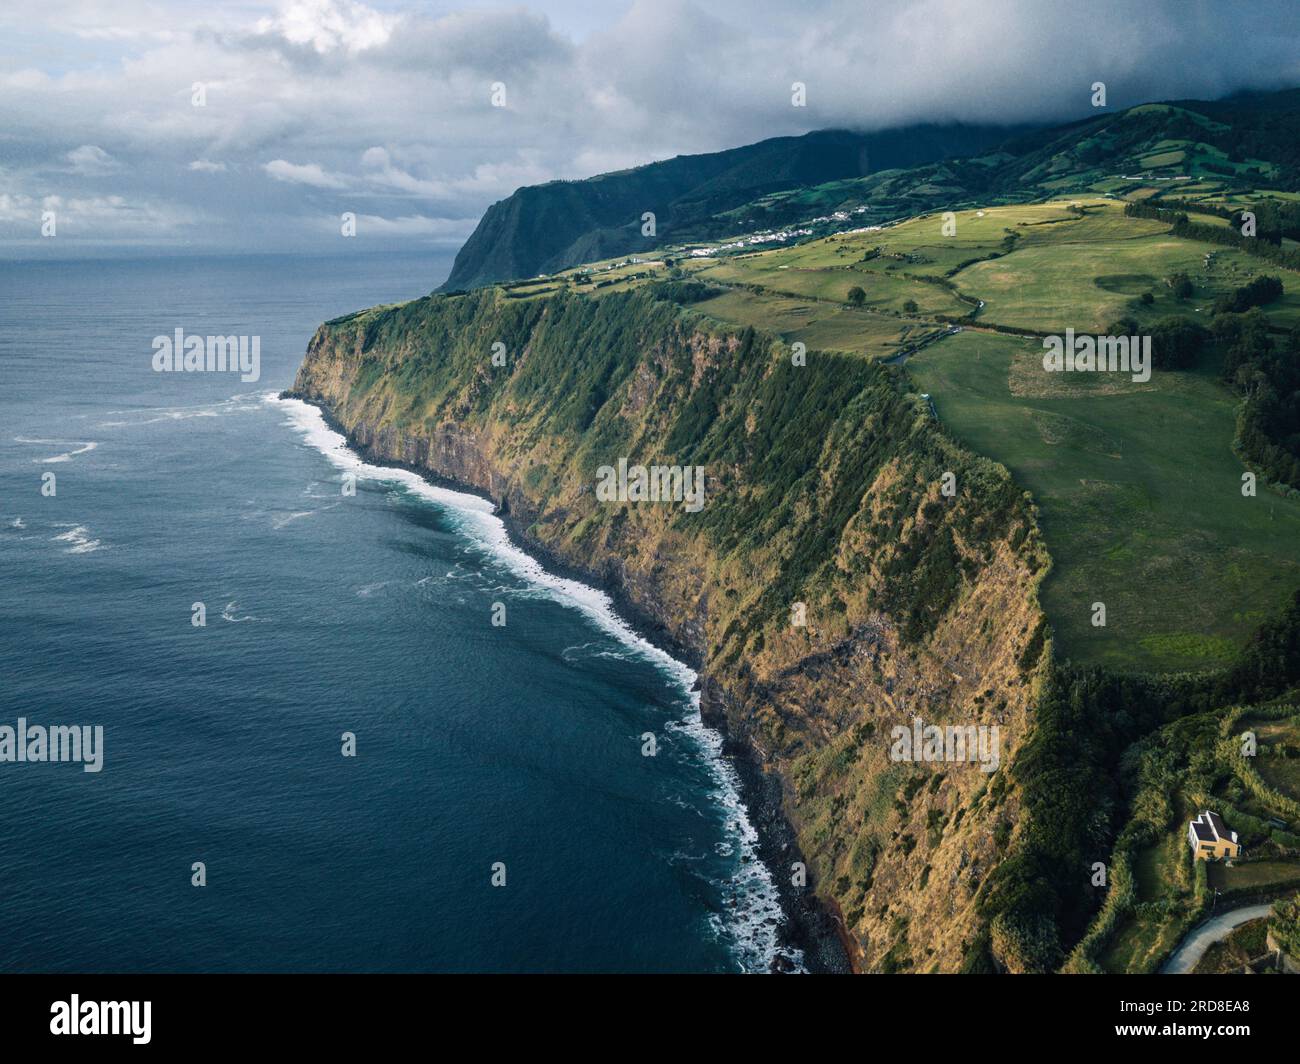 Cliffs and costline of Sao Miguel island, Azores, Portugal, Atlantic, Europe Stock Photo